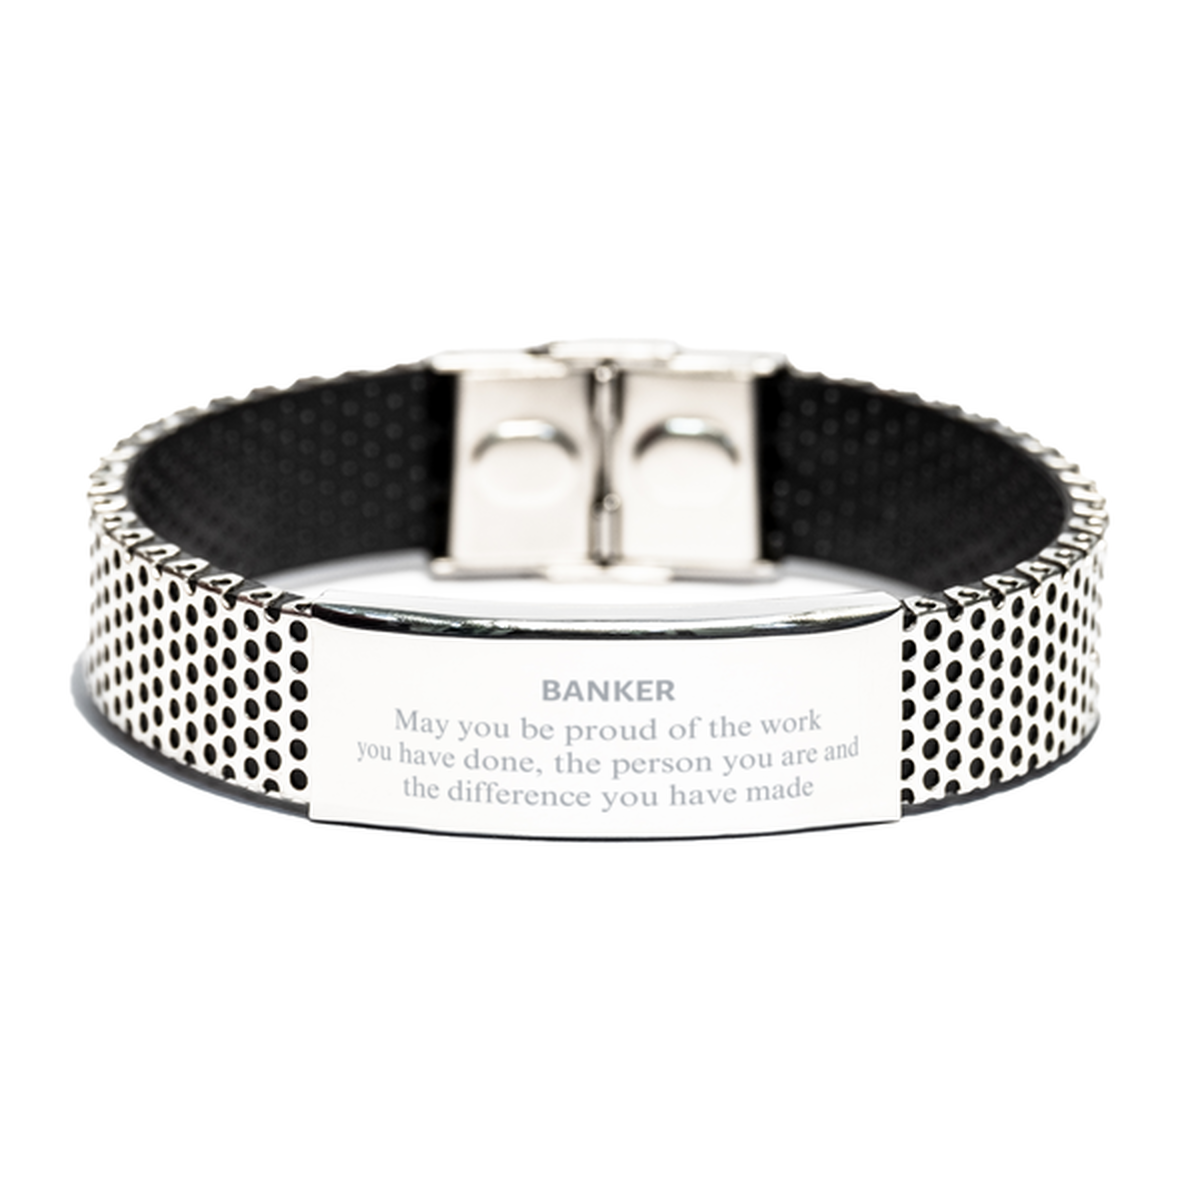 Banker May you be proud of the work you have done, Retirement Banker Stainless Steel Bracelet for Colleague Appreciation Gifts Amazing for Banker